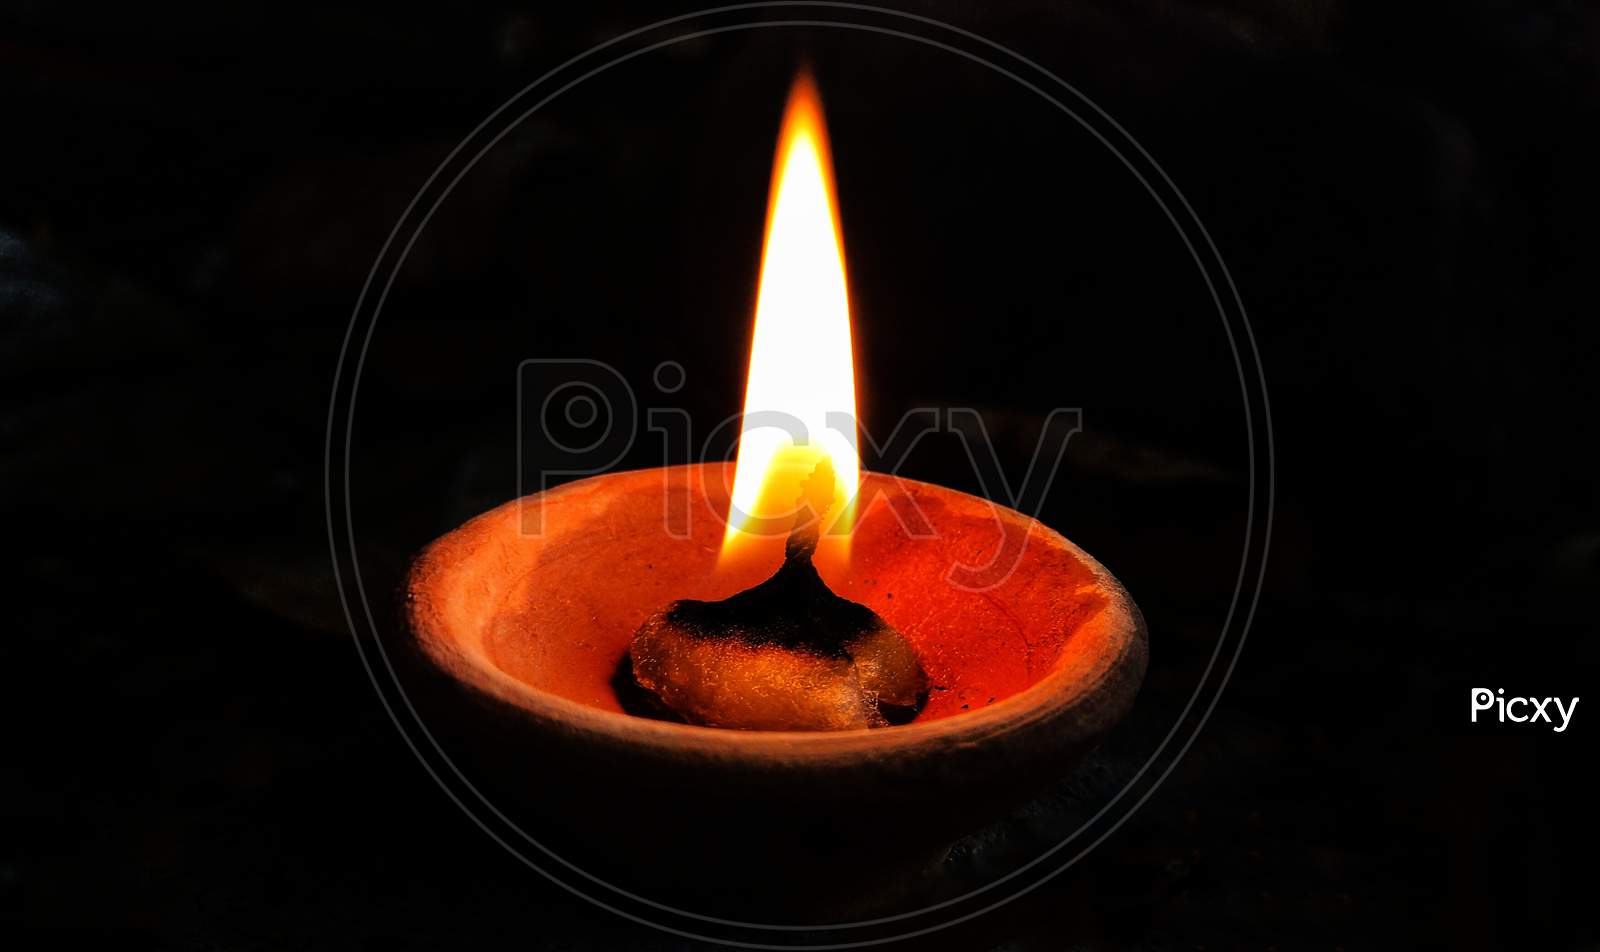 Oil lamp or Diya with black background